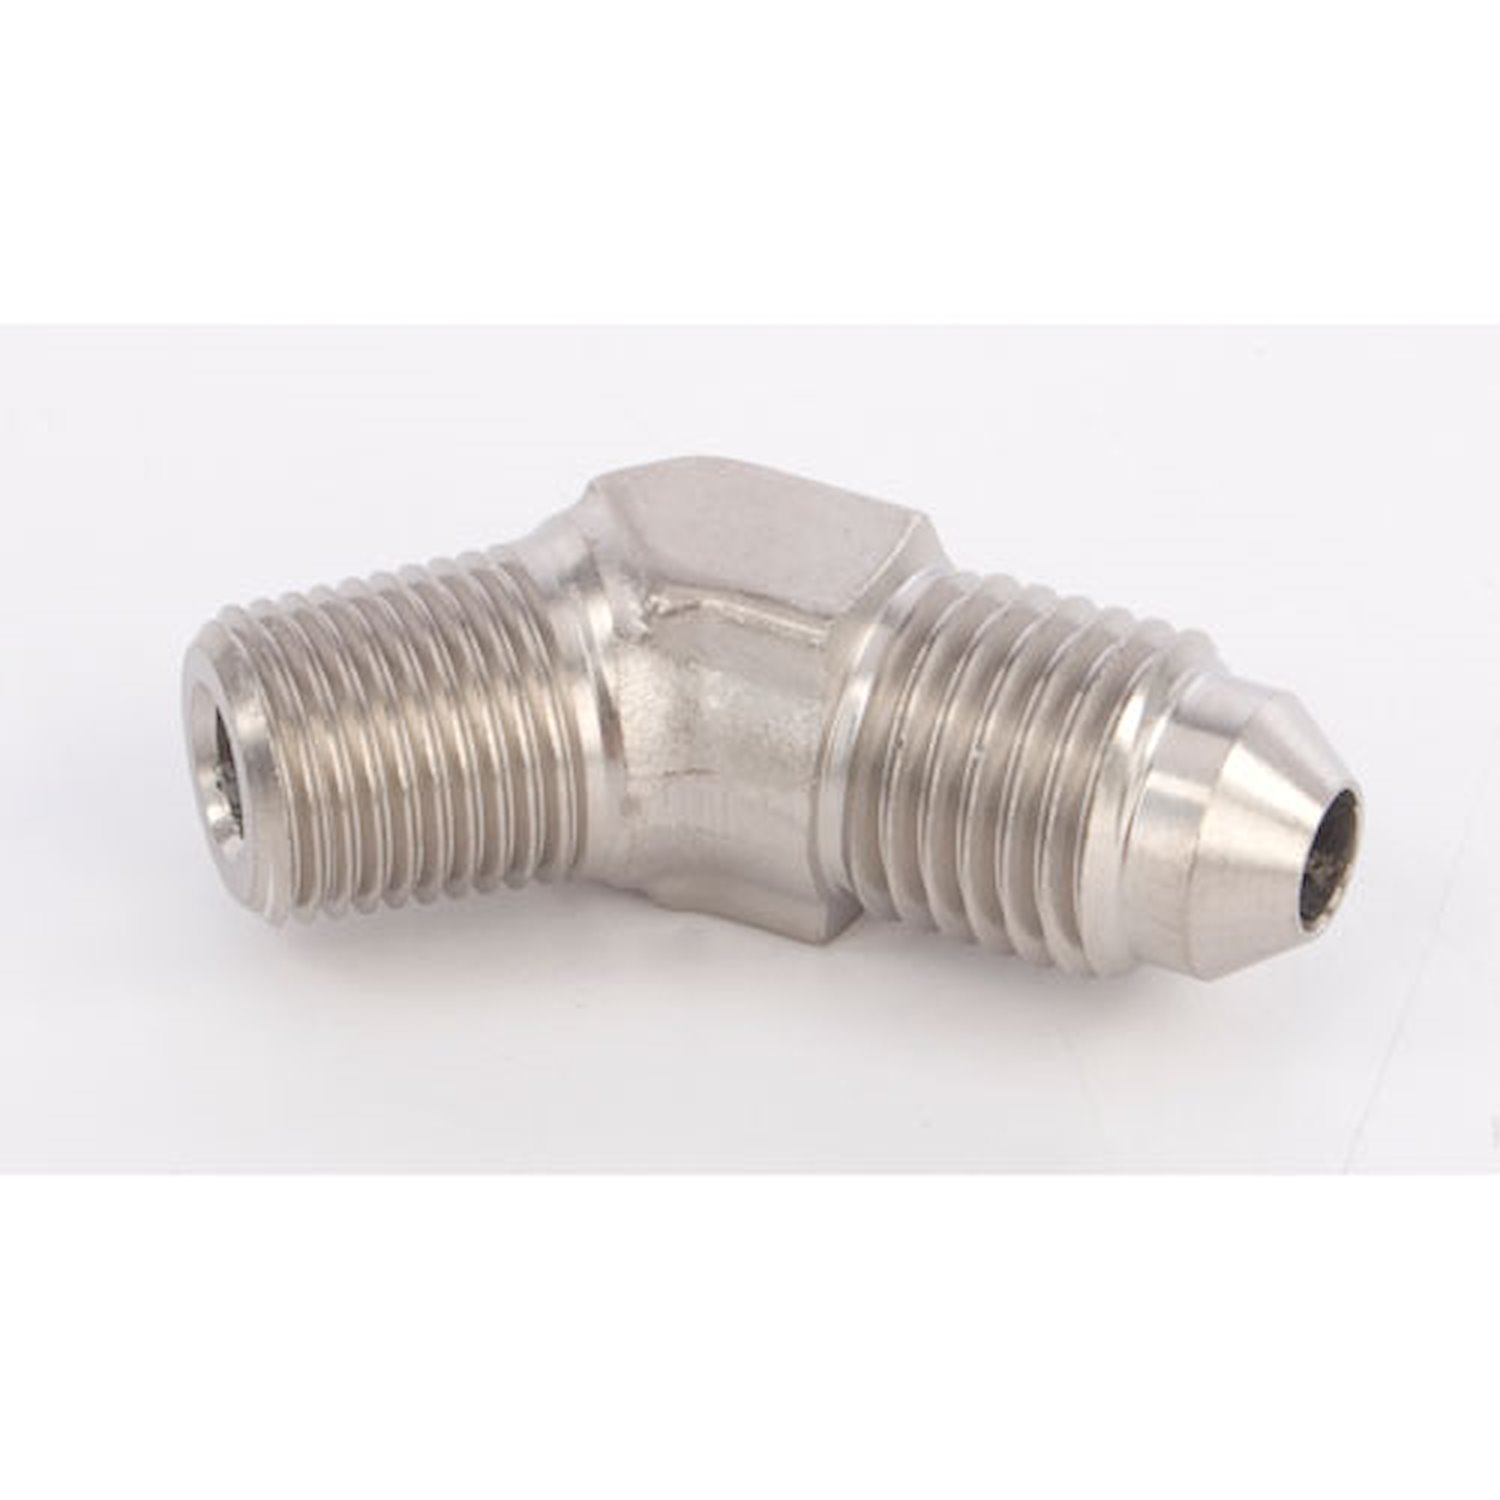 Nickel 45 degree Flare Fitting [1/8 in. NPT to -4 AN Flare]